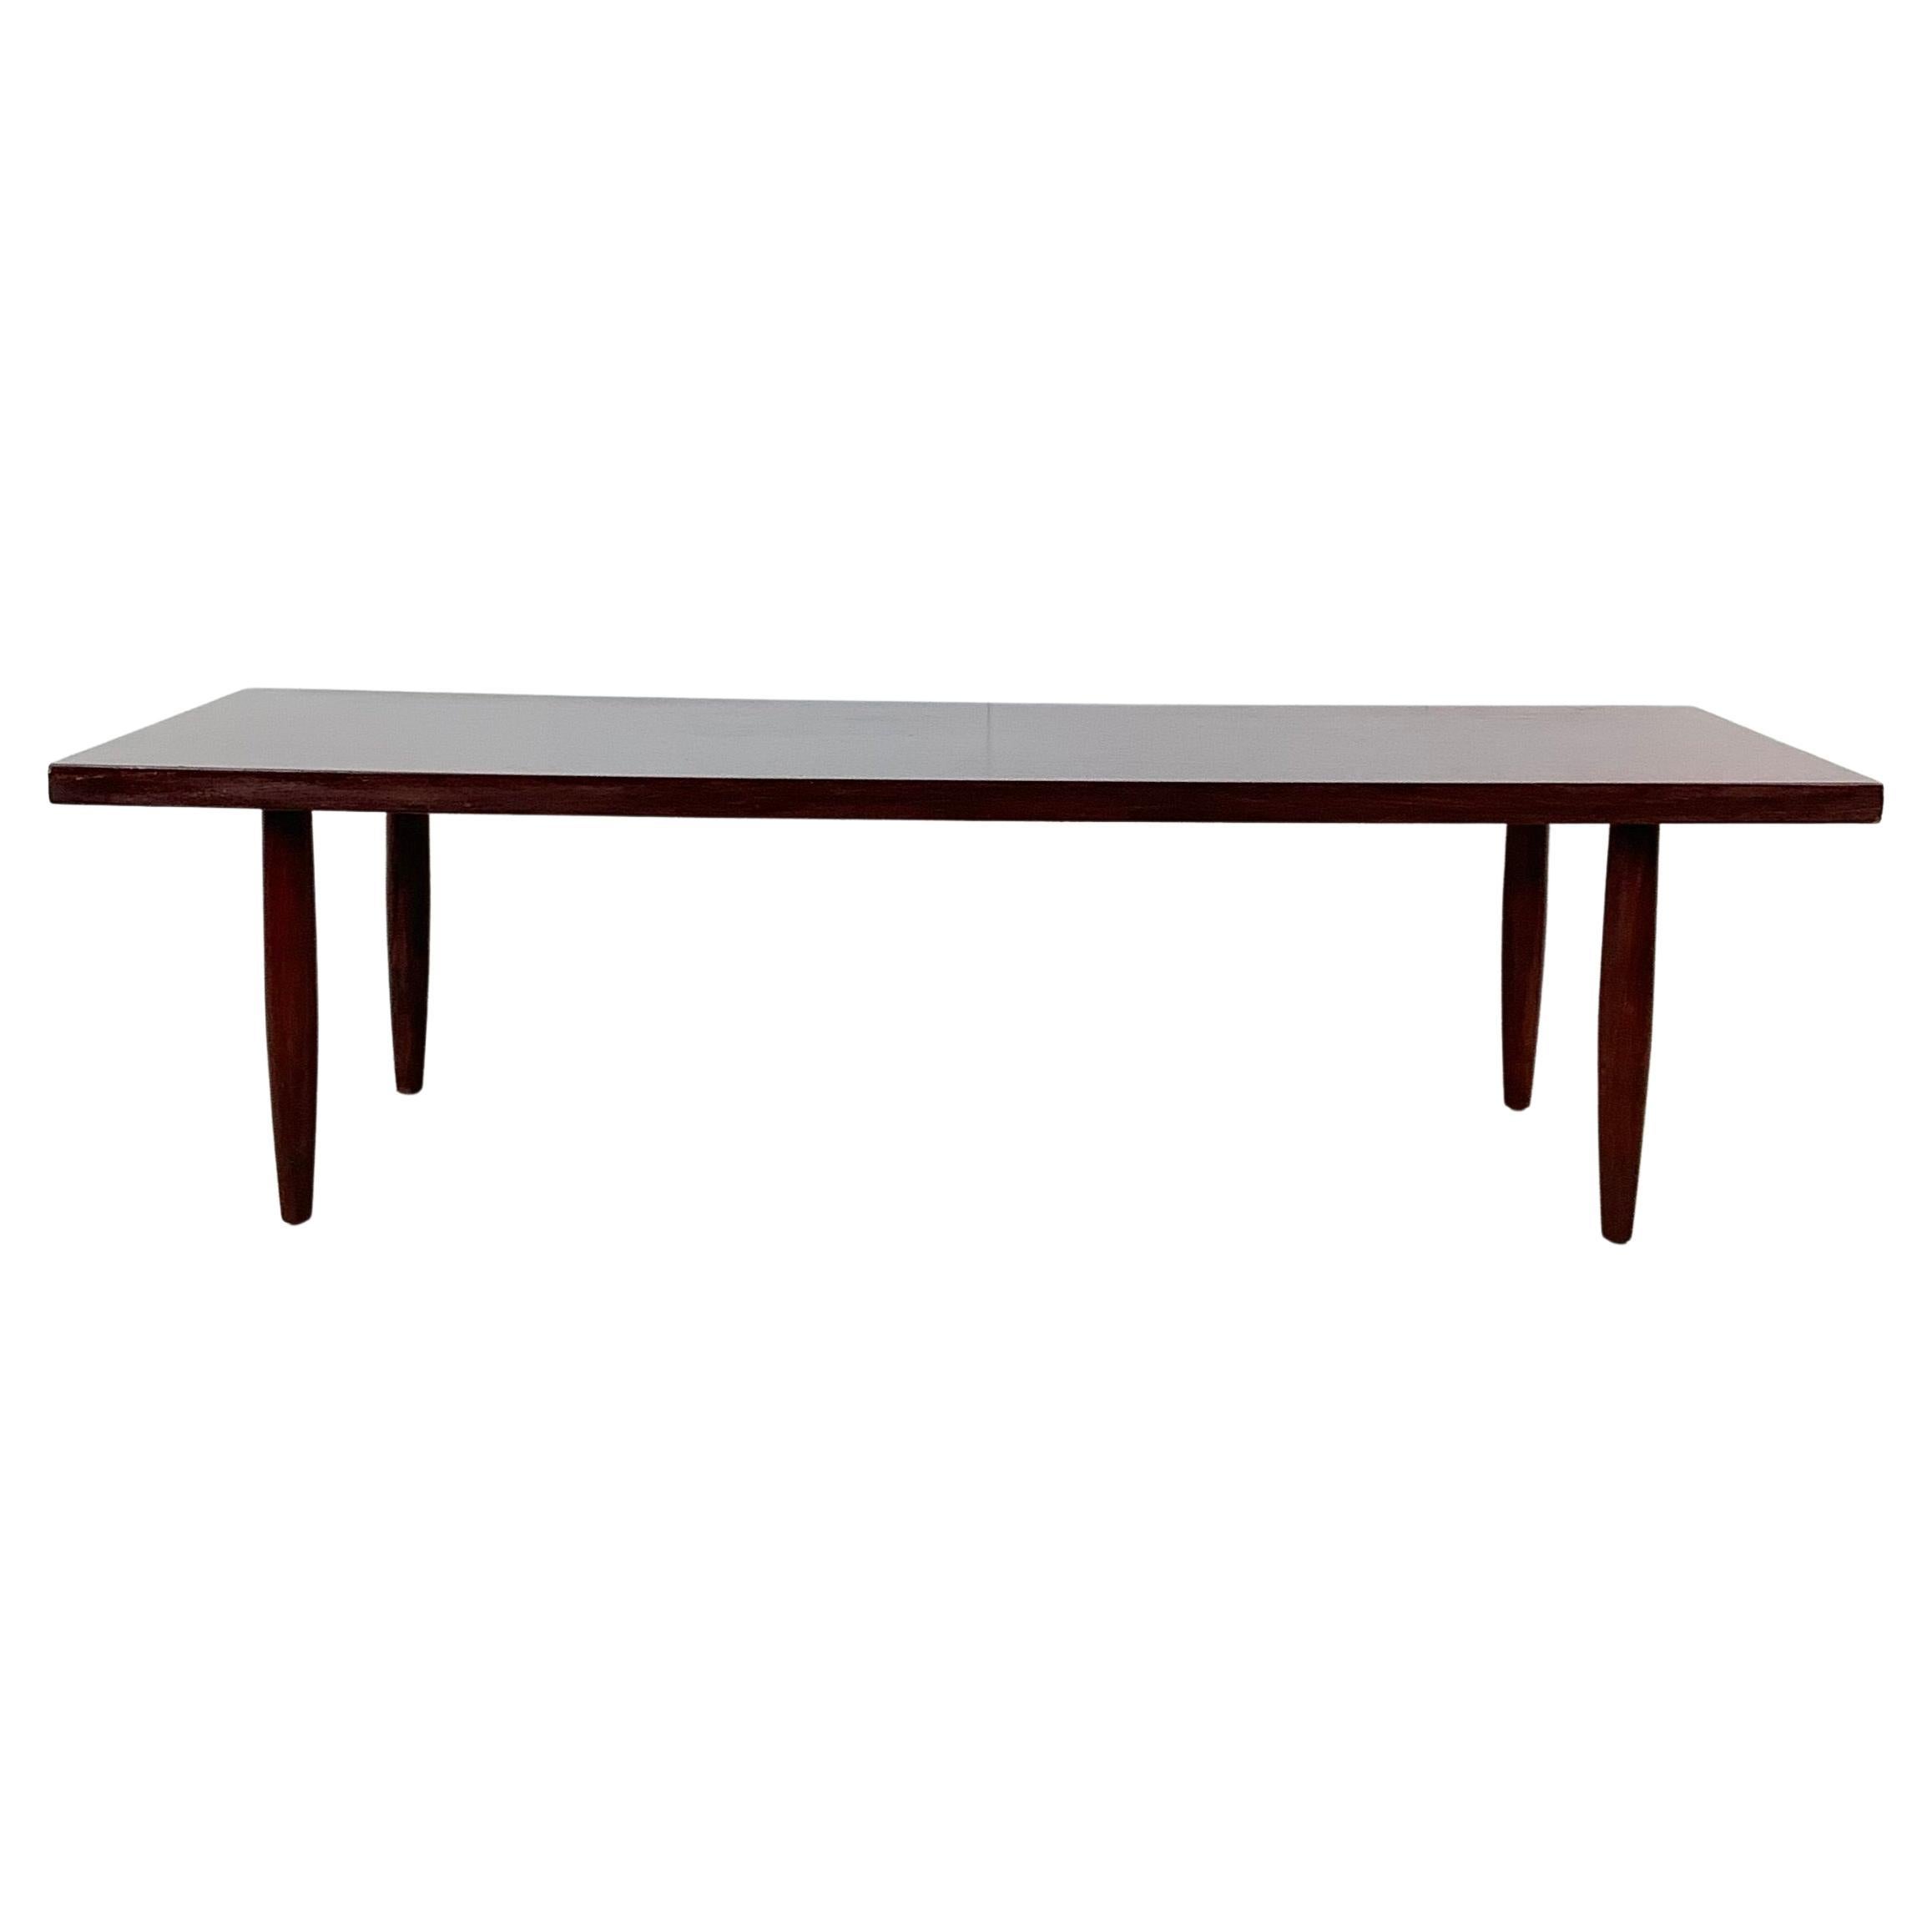 Mid-Century Modern Coffee Table with Tapered Legs